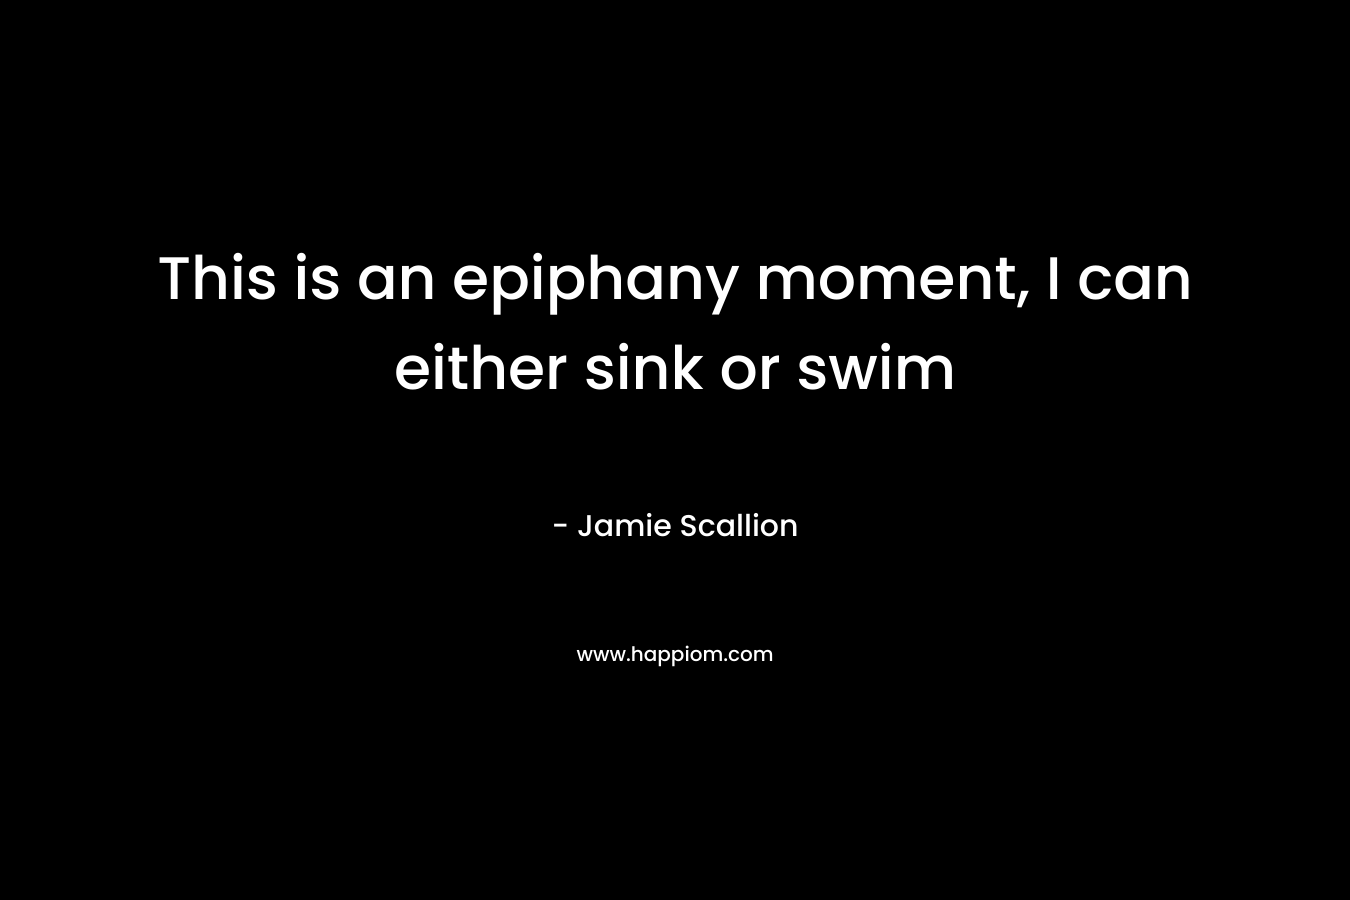 This is an epiphany moment, I can either sink or swim